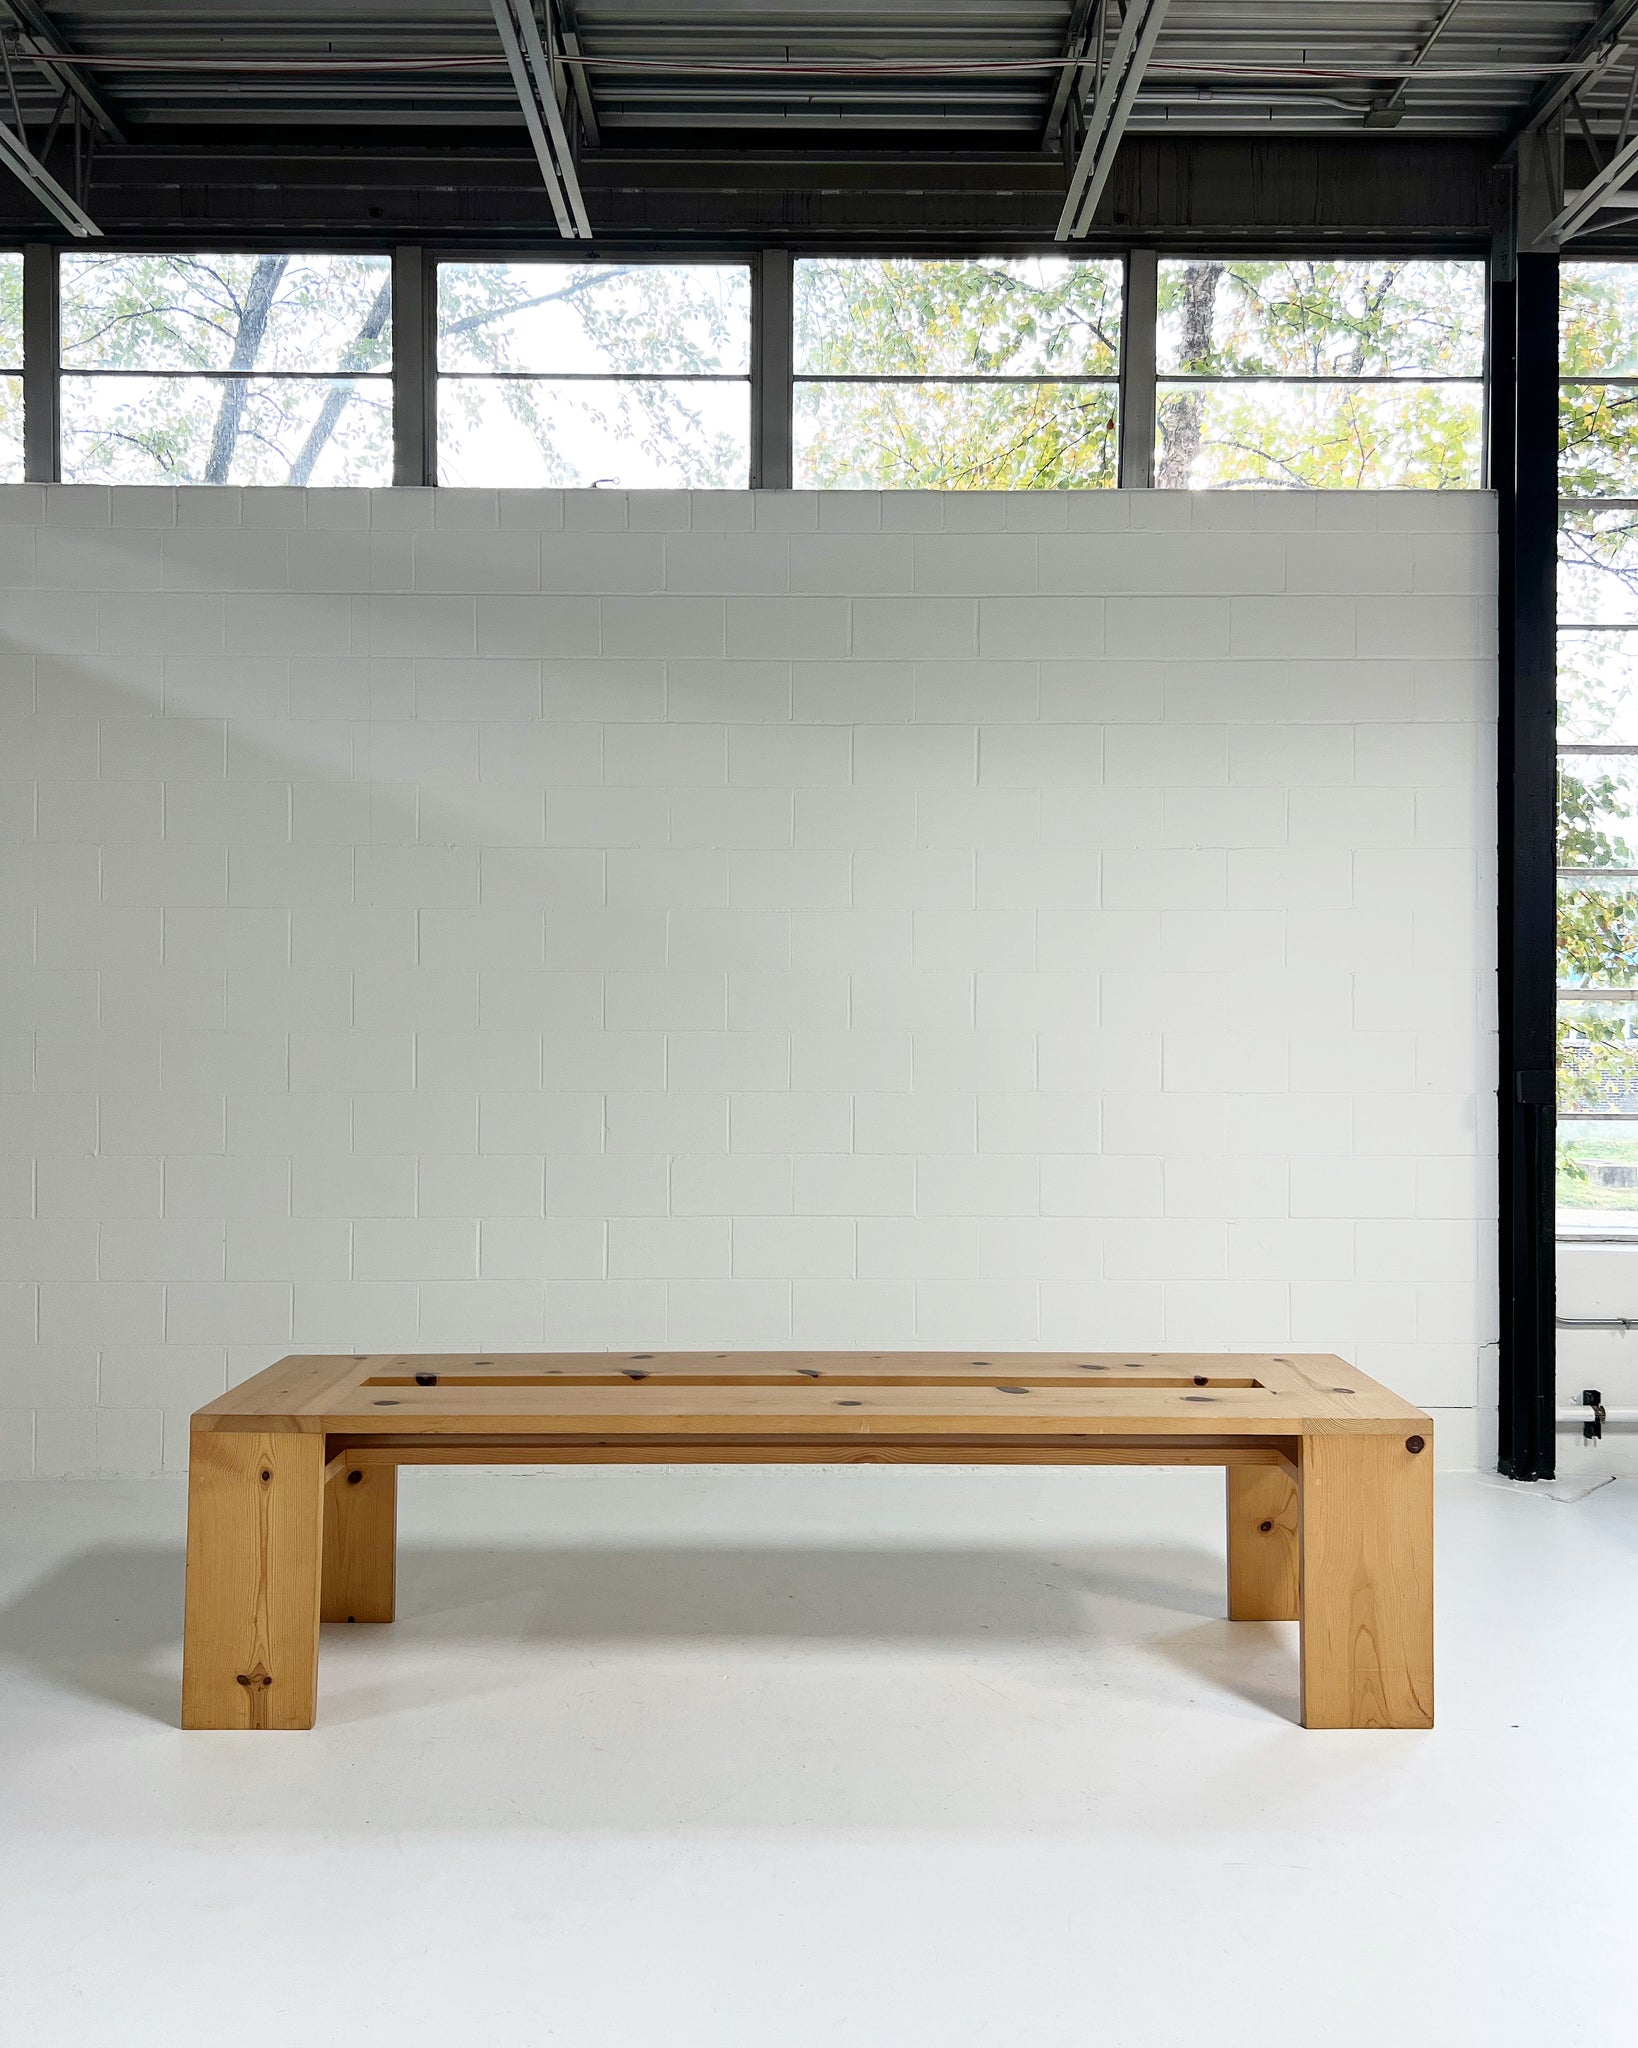 Slotted Library Tables Selected by John Pawson for the 1995 Calvin Klein Store in New York, Two Available